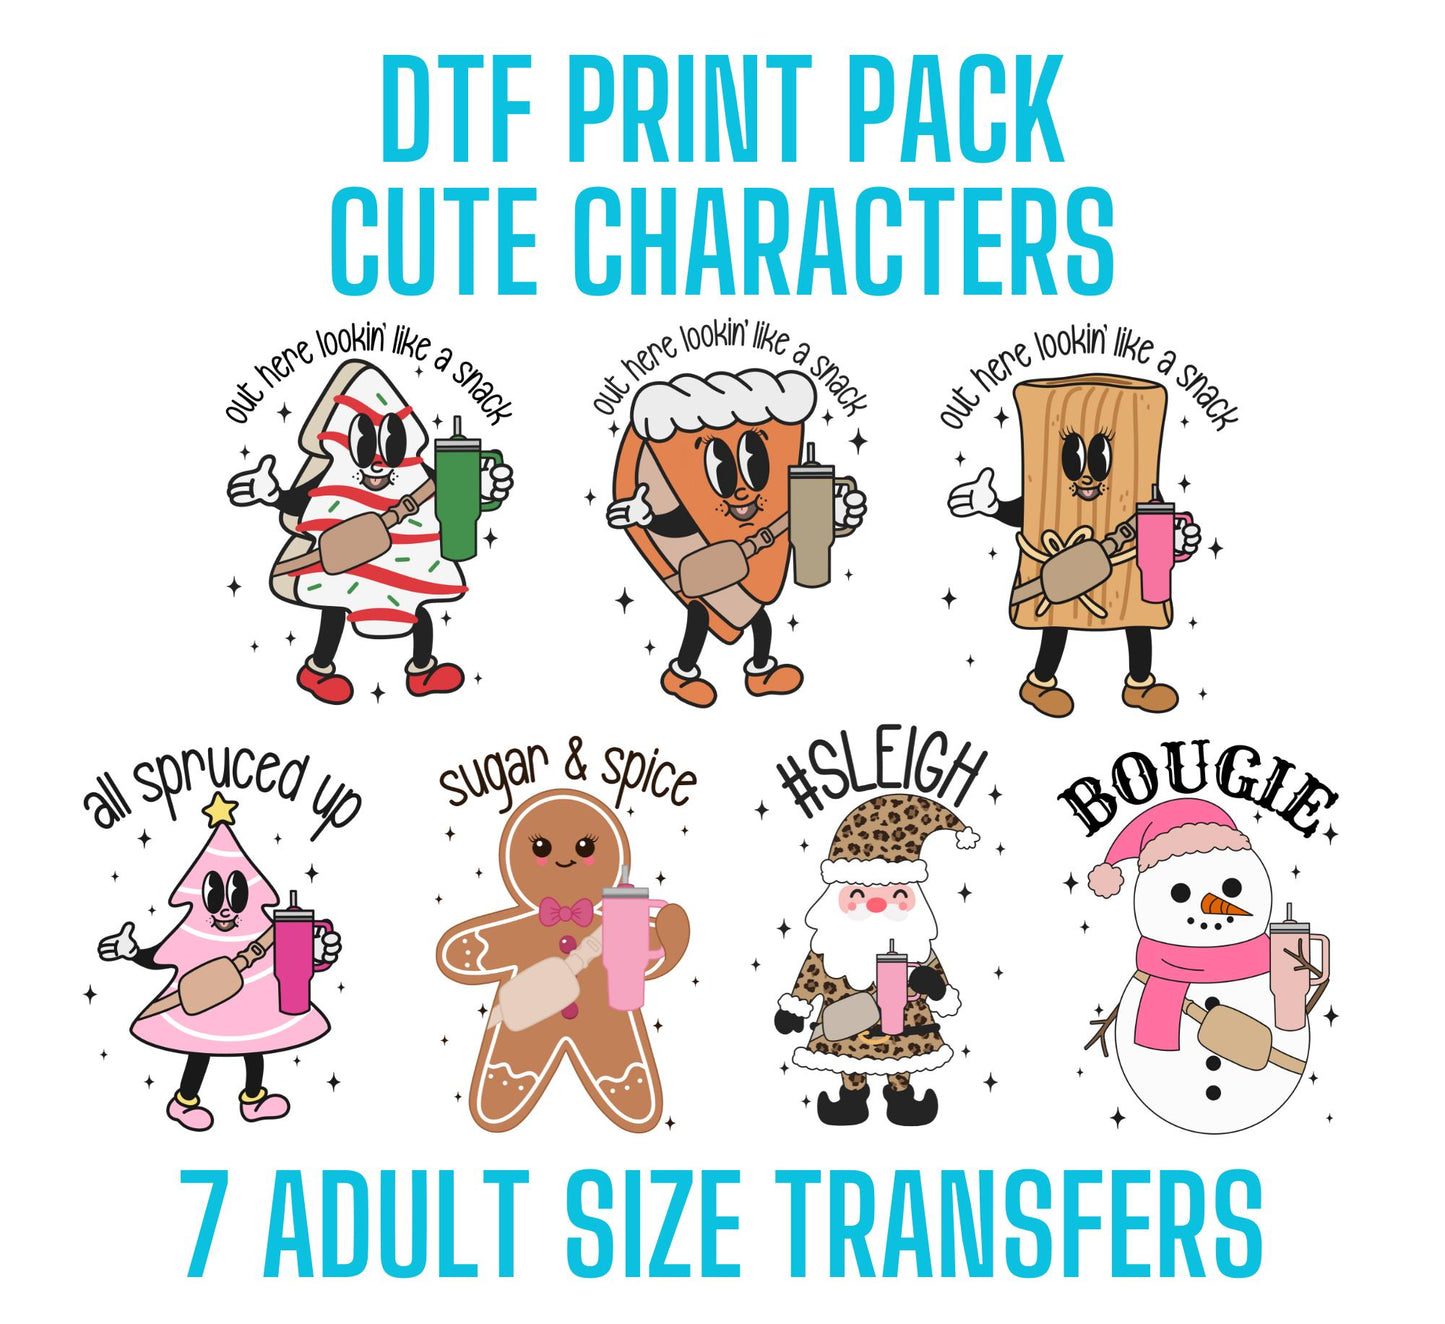 DTF Print Pack: Cute Characters